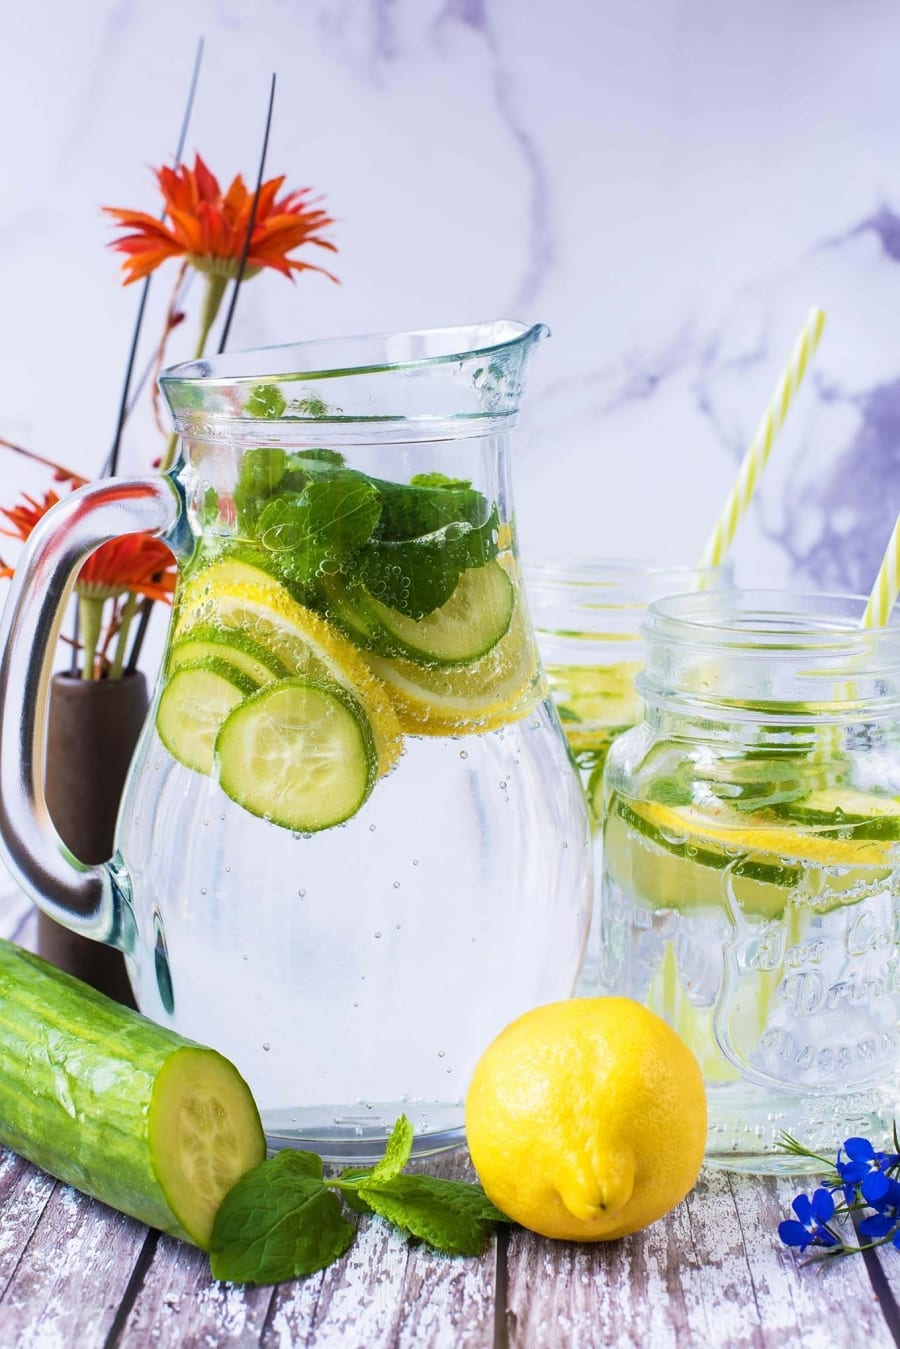 A large glass jug full of sparkling cucumber water next to glasses of water.